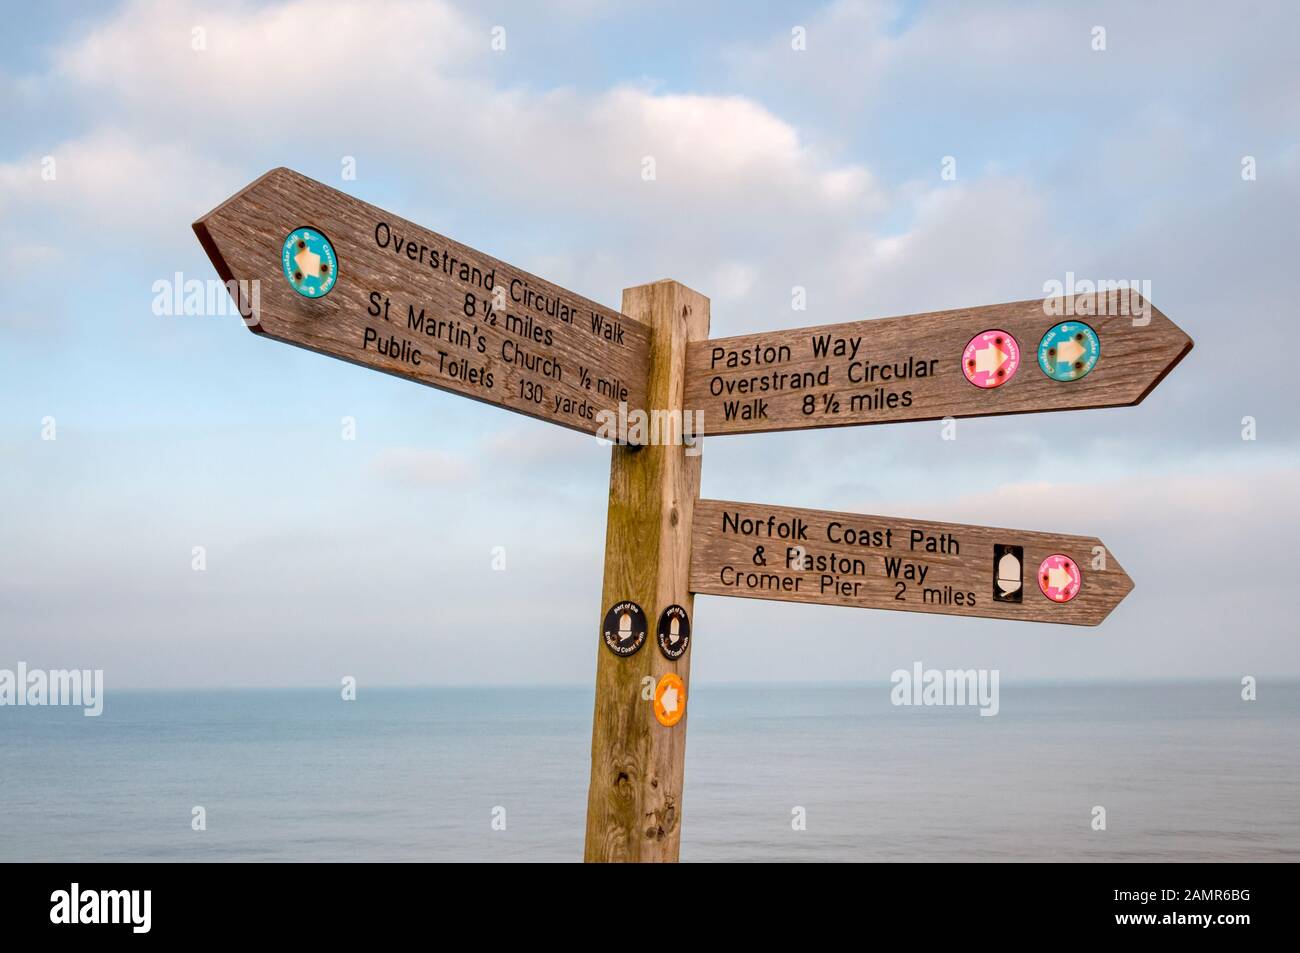 A waymark and signpost for the Overstrand Circular Walk, Norfolk Coast Path & Paston Way in Norfolk. Stock Photo